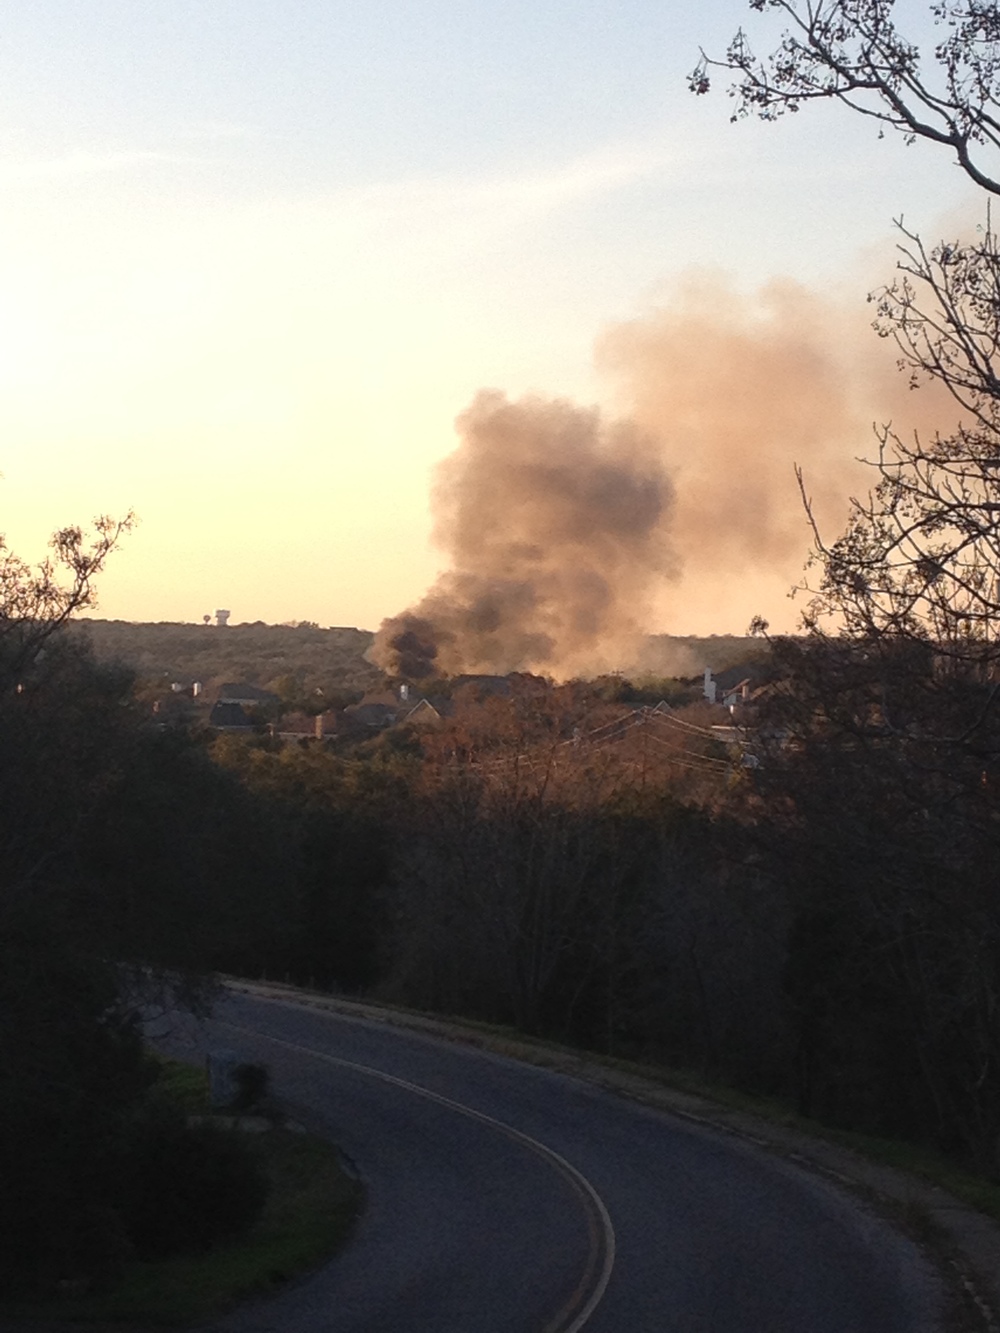 The smoke from the fire could be seen from Yaupon Drive. Photo by Gabe Kotick.